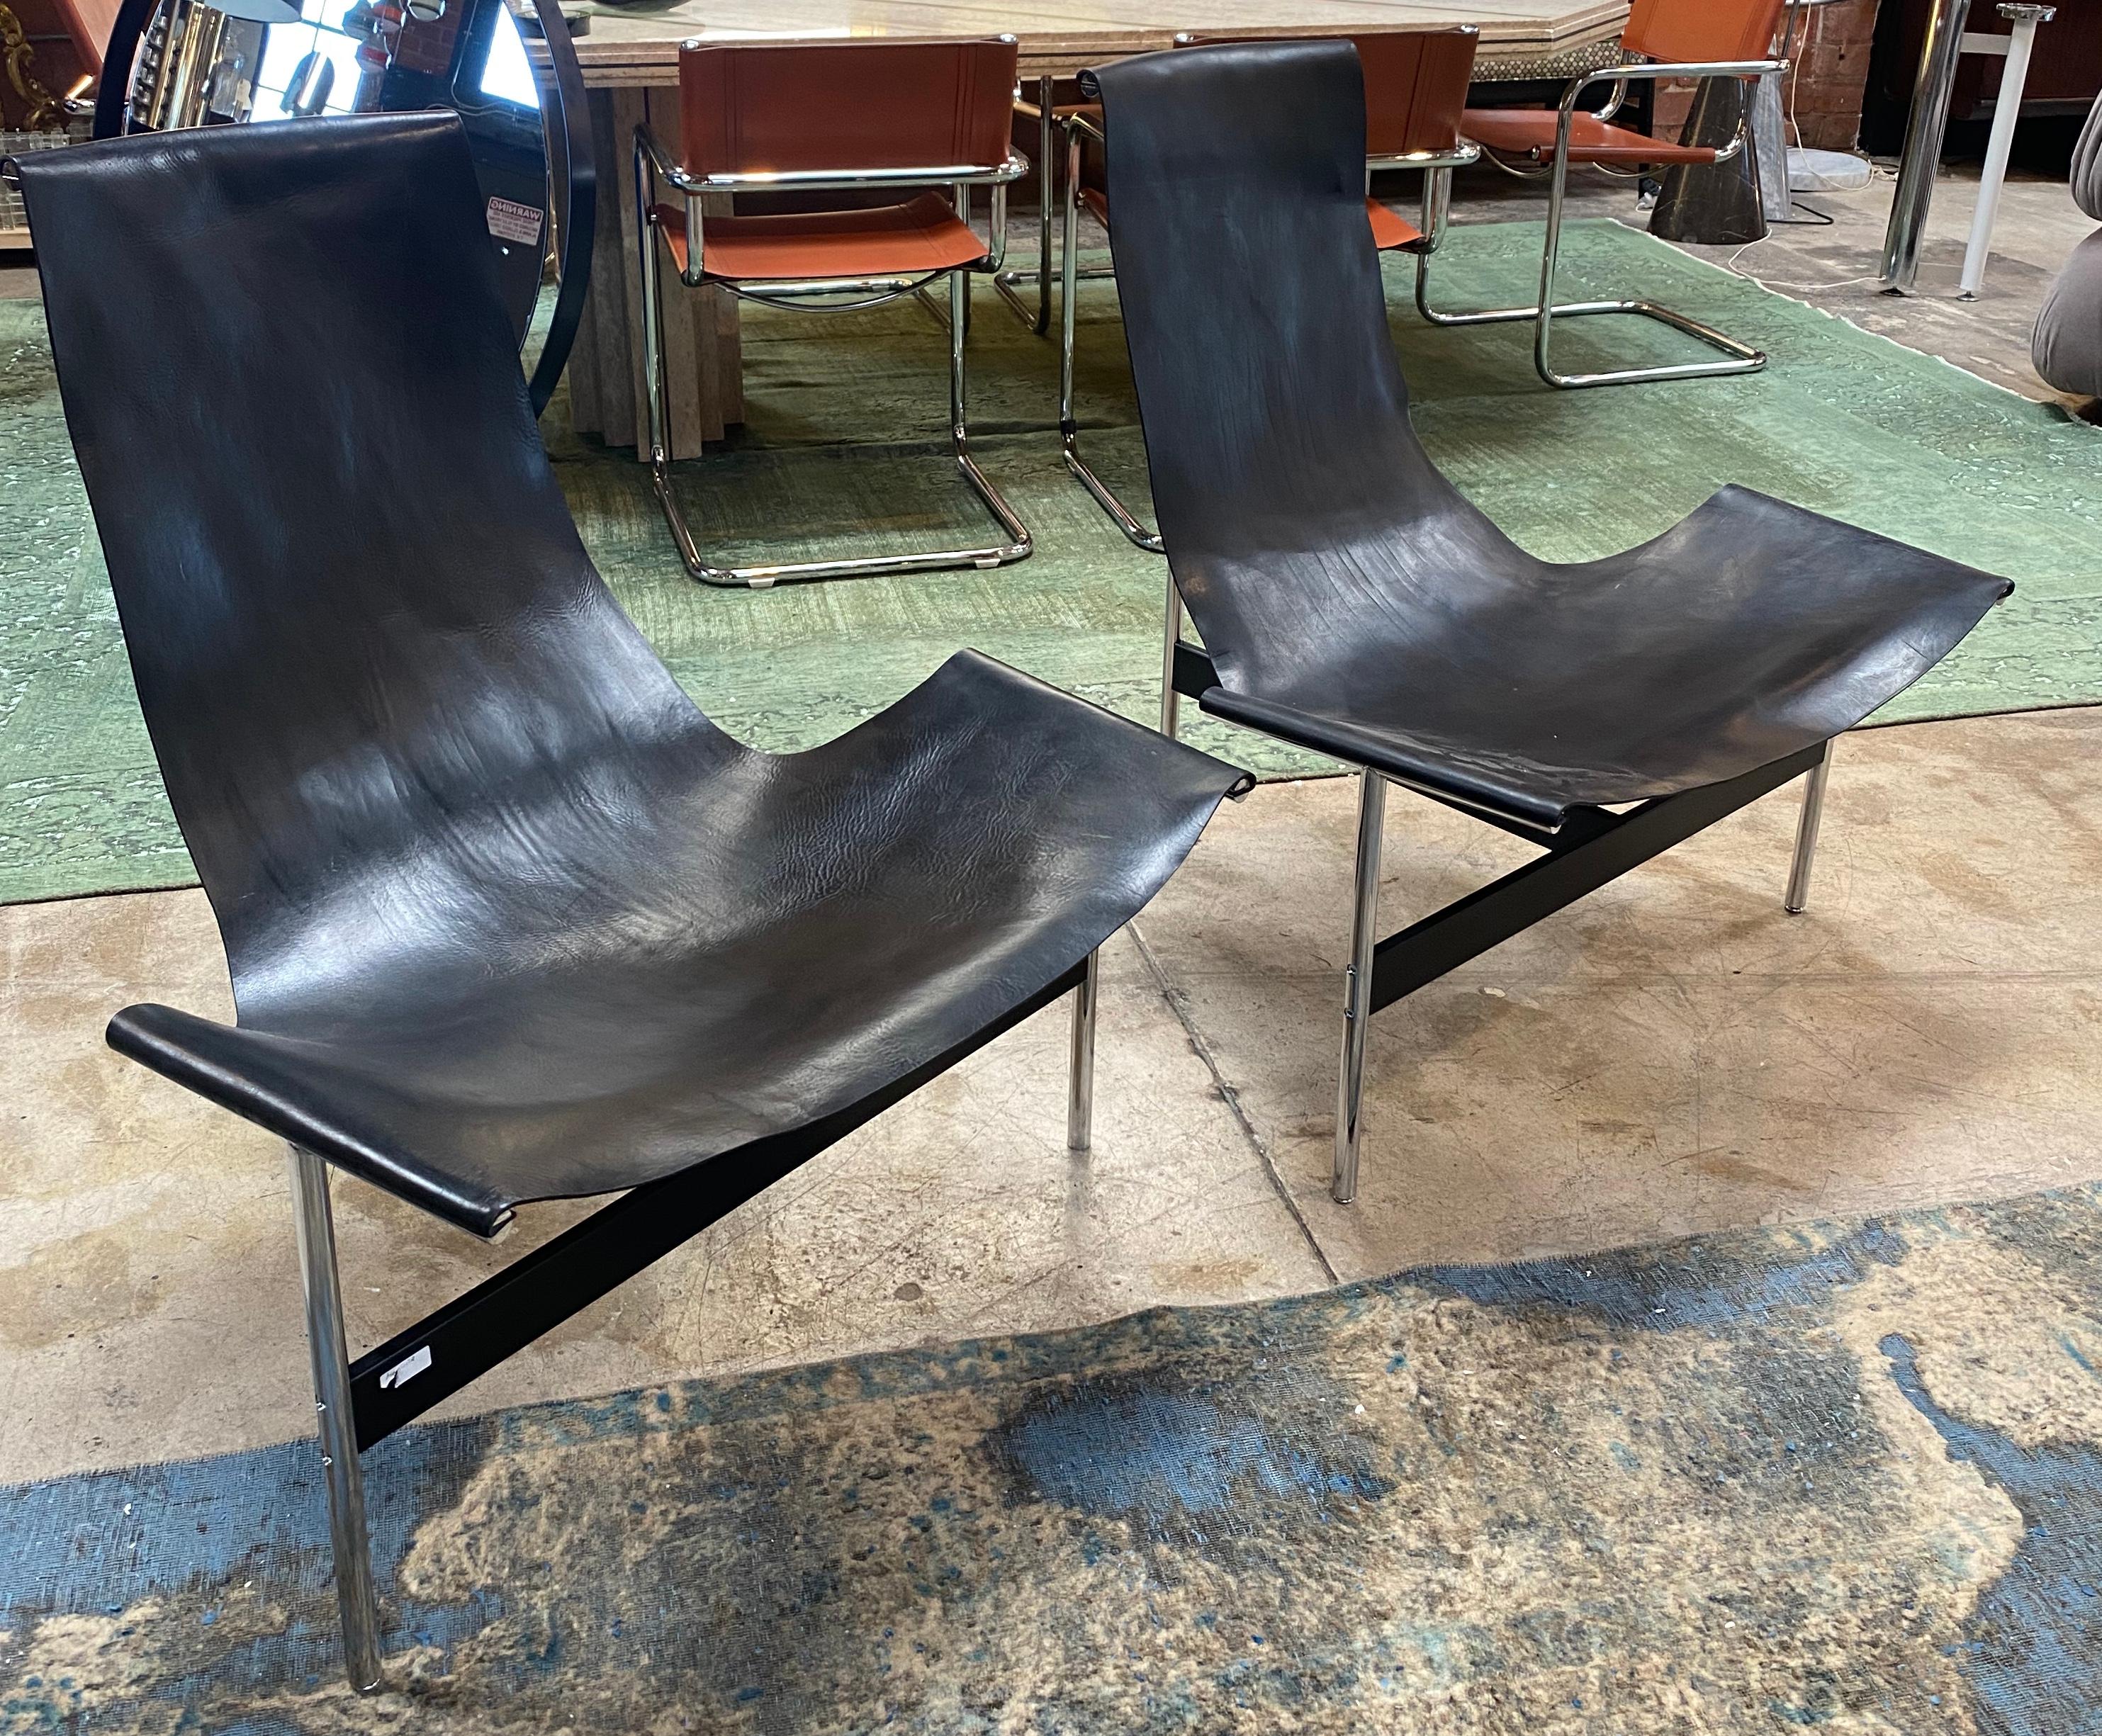 Katavolos, Littell, & Kelley for Laverne International, lounge chair, chrome, leather, United Stated, 1952.

William Katavolos designed, together with Douglas Kelley & Ross Littell, the iconic sling-back T chair as model 3LC in Laverne